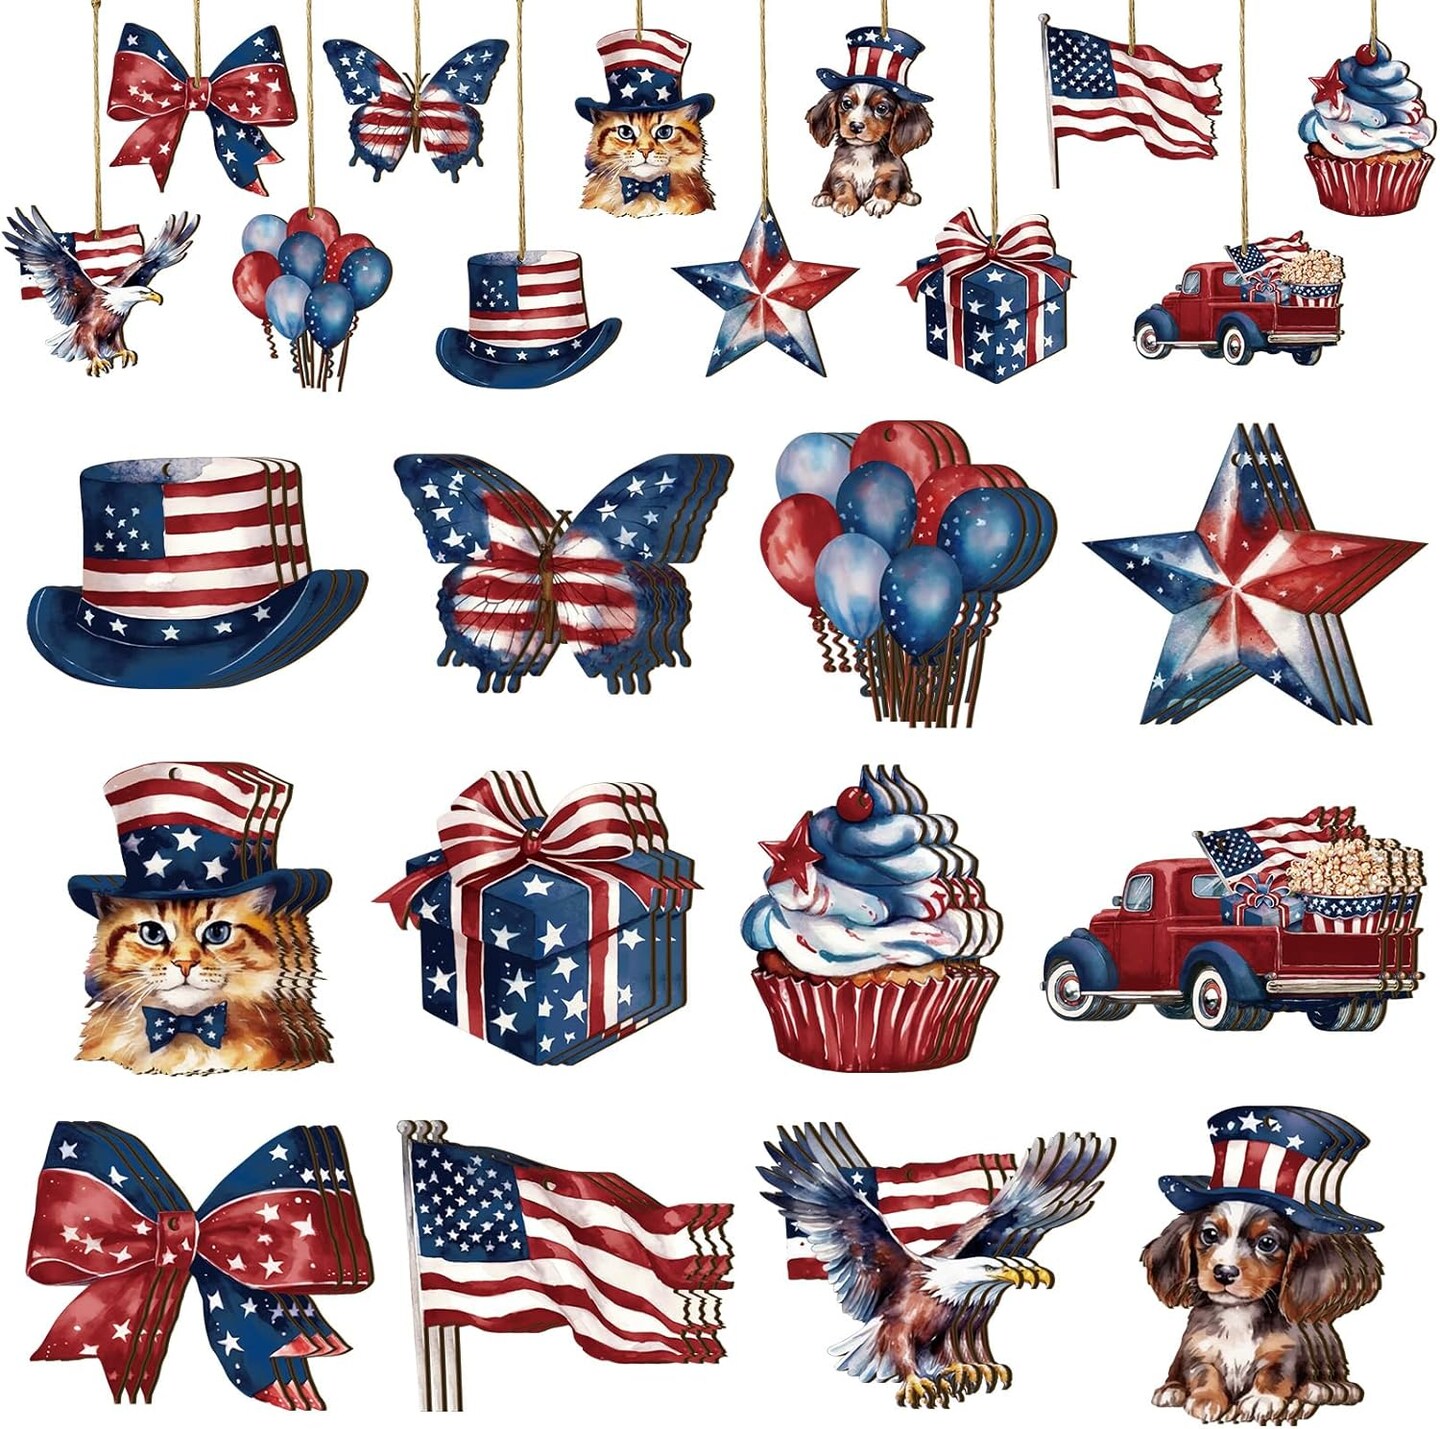 36 Pcs 4th of July Hanging Ornaments for Tree Wood Patriotic Ornaments